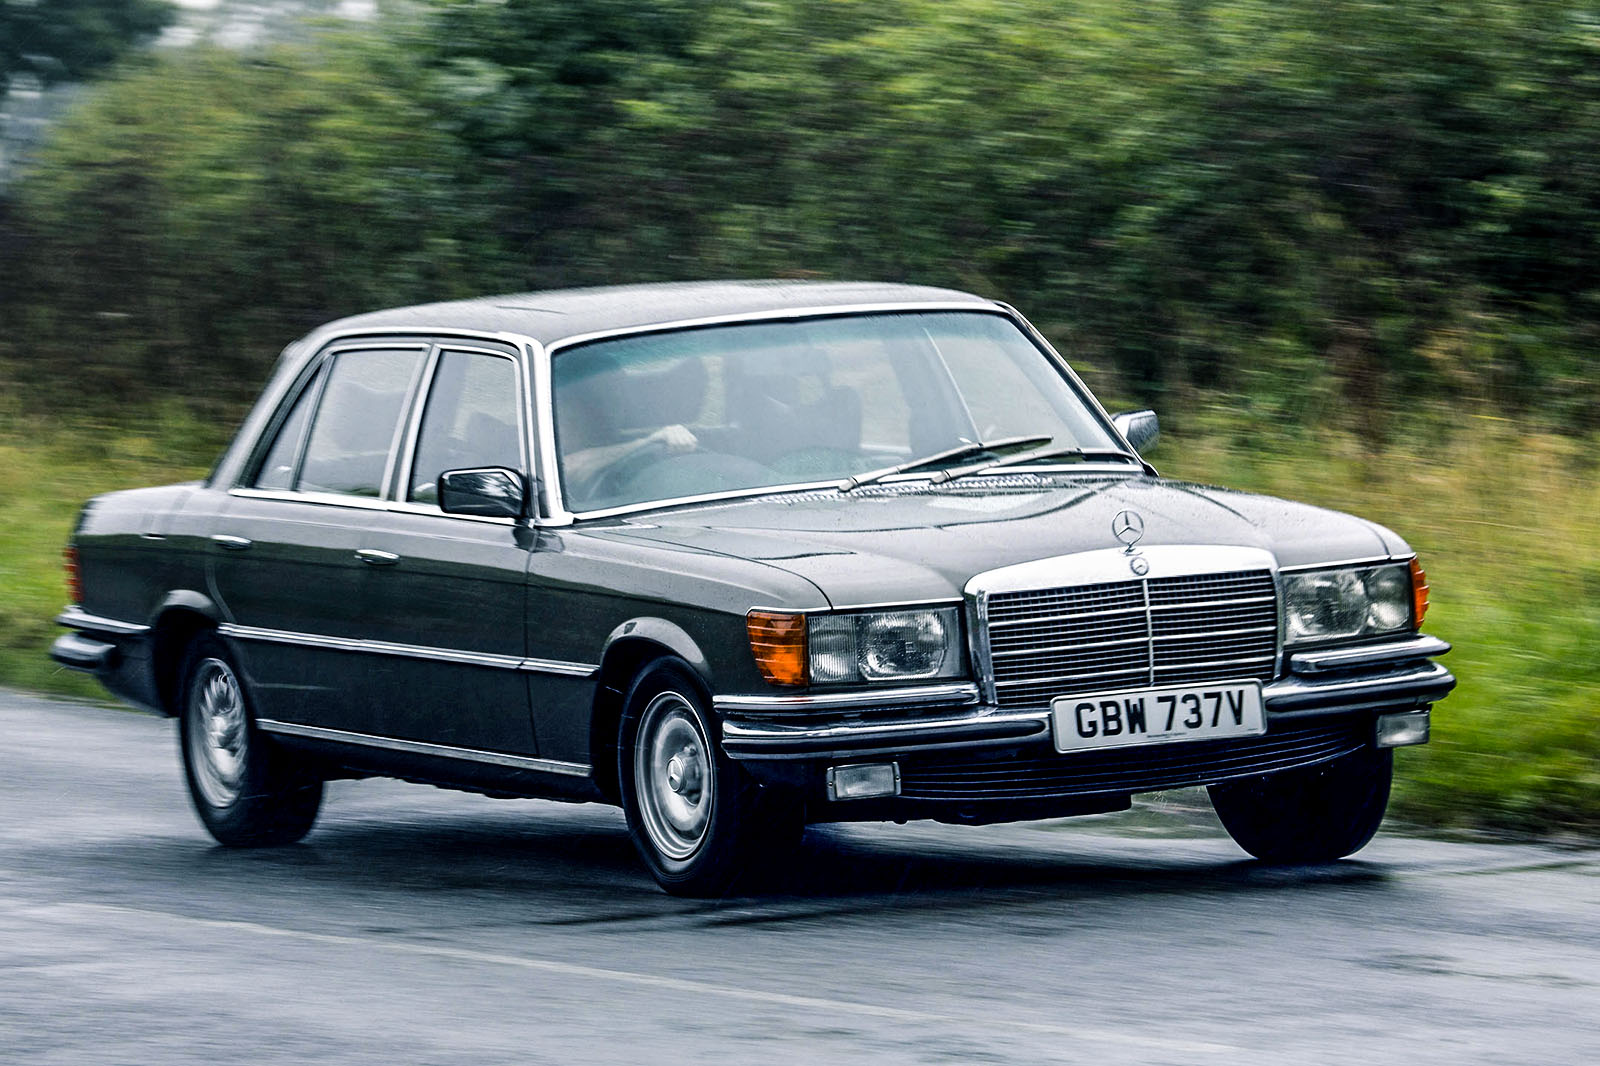 <p>Ignore the 6.9 in the title of this Mercedes <strong>Q-car </strong>sedan, its M100 V8 displaced 6.8-liters. It was still the biggest engine available in any car the from the German manufacturer at the time and <strong>cramming</strong> it into the S-Class sedan was an inspired decision. To maintain the S-Class’ reputation for unburstable reliability, each 6.8-liter V8 was <strong>bench-tested</strong> for four and a half hours before being installed in the car.</p><p>The engine block was iron, but the cylinder heads were aluminum and used sodium-filled valves. There was also Bosch K-Jetronic <strong>fuel injection</strong>, which was very unusual for the time, and it helped the M100 produce <strong>290 hp</strong>. It also generated 405 lb-ft of torque, which made the 450SEL 6.9 capable of <strong>140mph</strong> and endeared it to <strong>7380 buyers</strong> when new.</p>